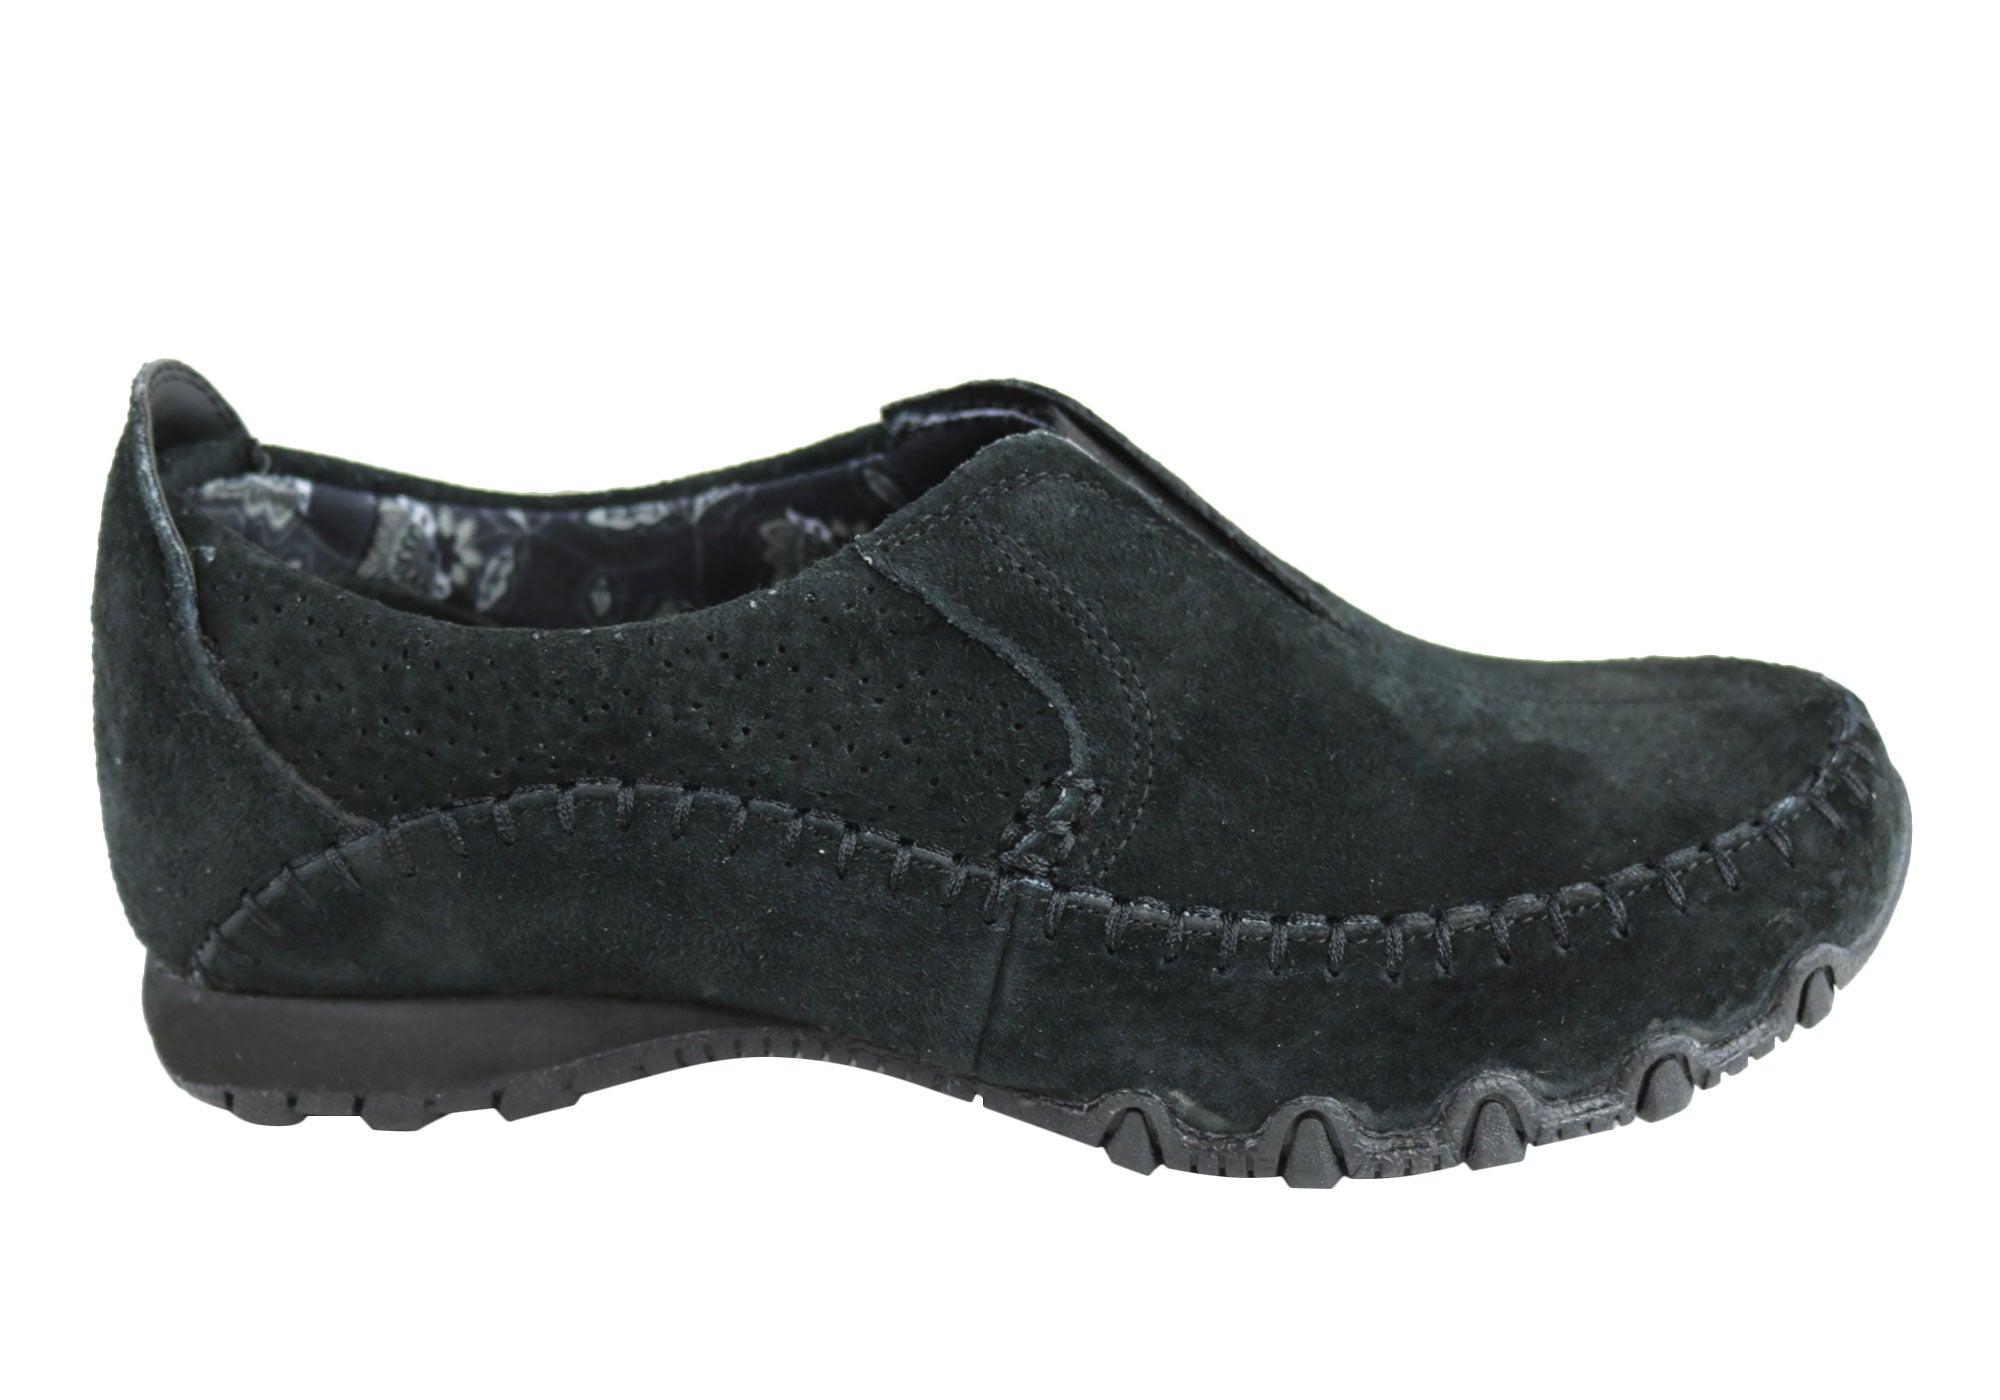 skechers collection dress shoes